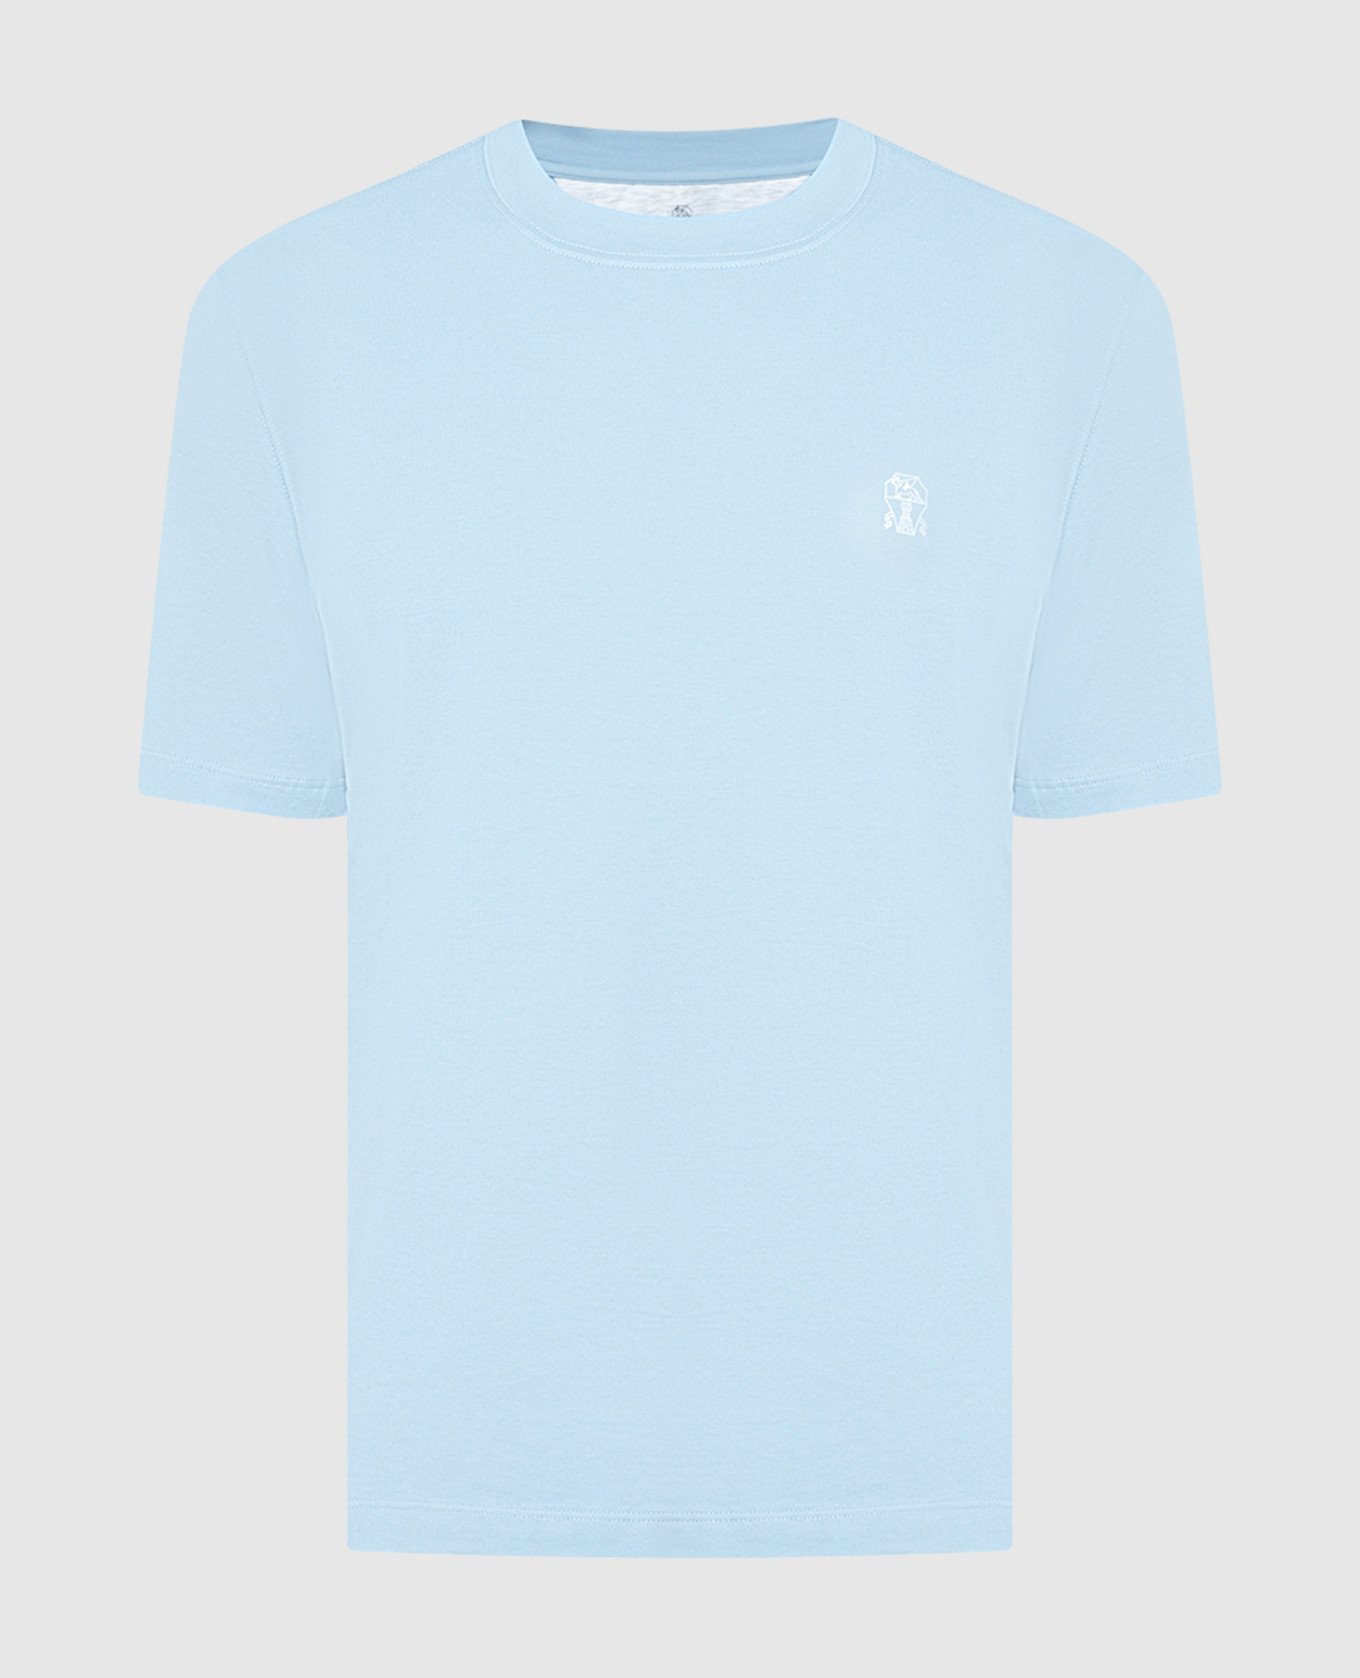 Blue T-shirt with a print